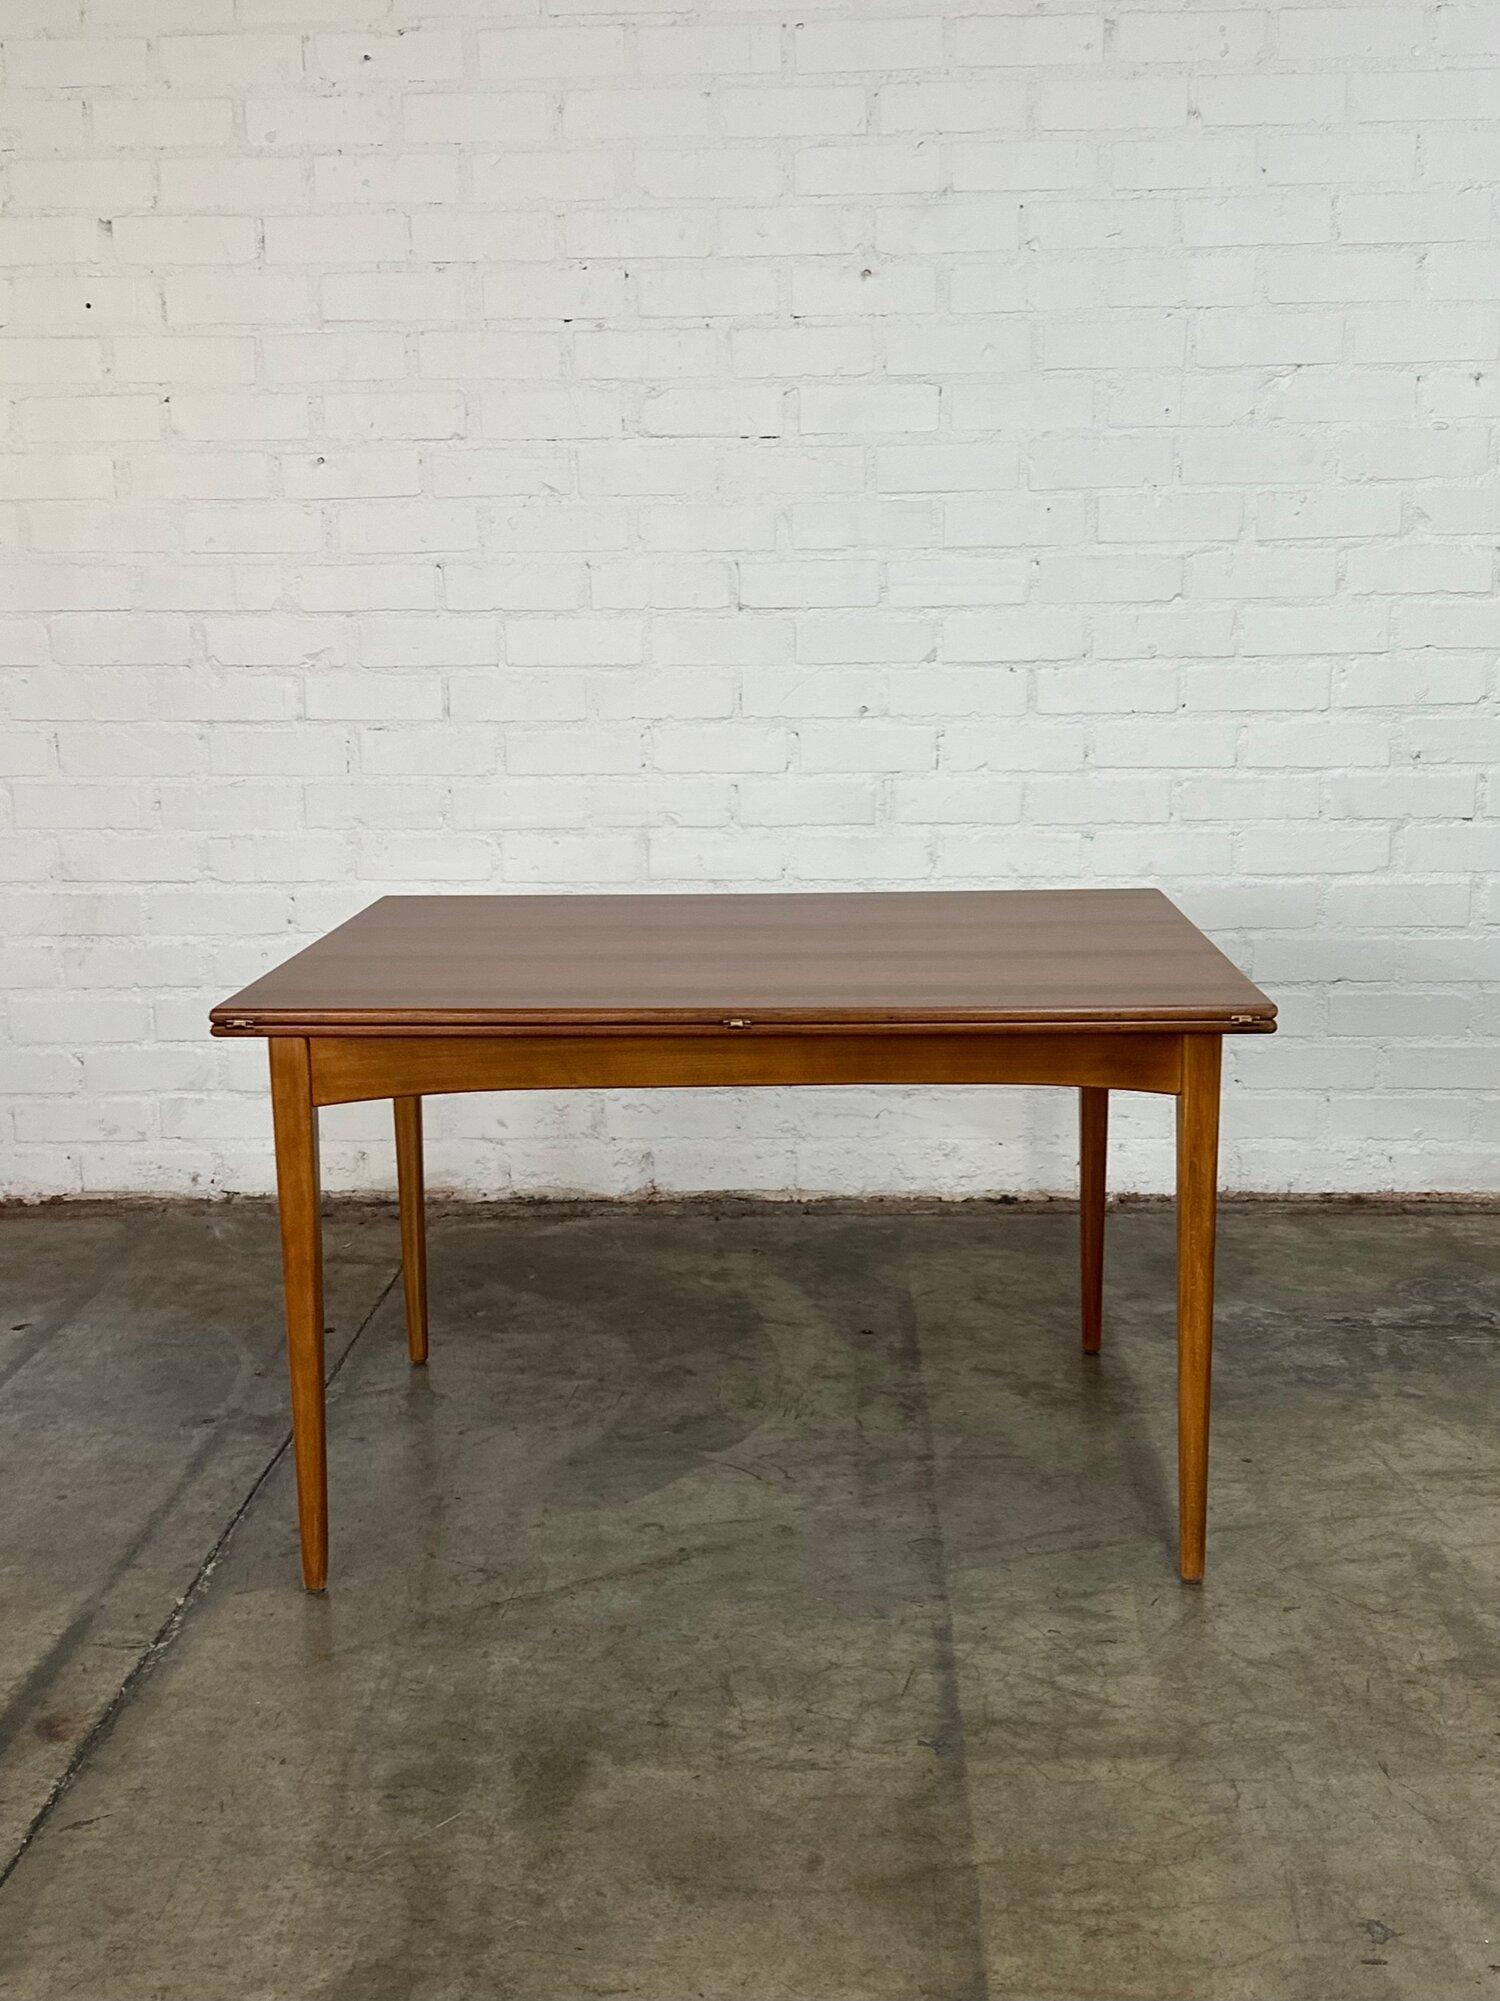 W47.5 D35.5 H28.5 KC26.5

Folding dining table with exceptional grain surface. Item has been fully restored and shows well with no major areas of wear. Surface opens and closes smoothly. 

